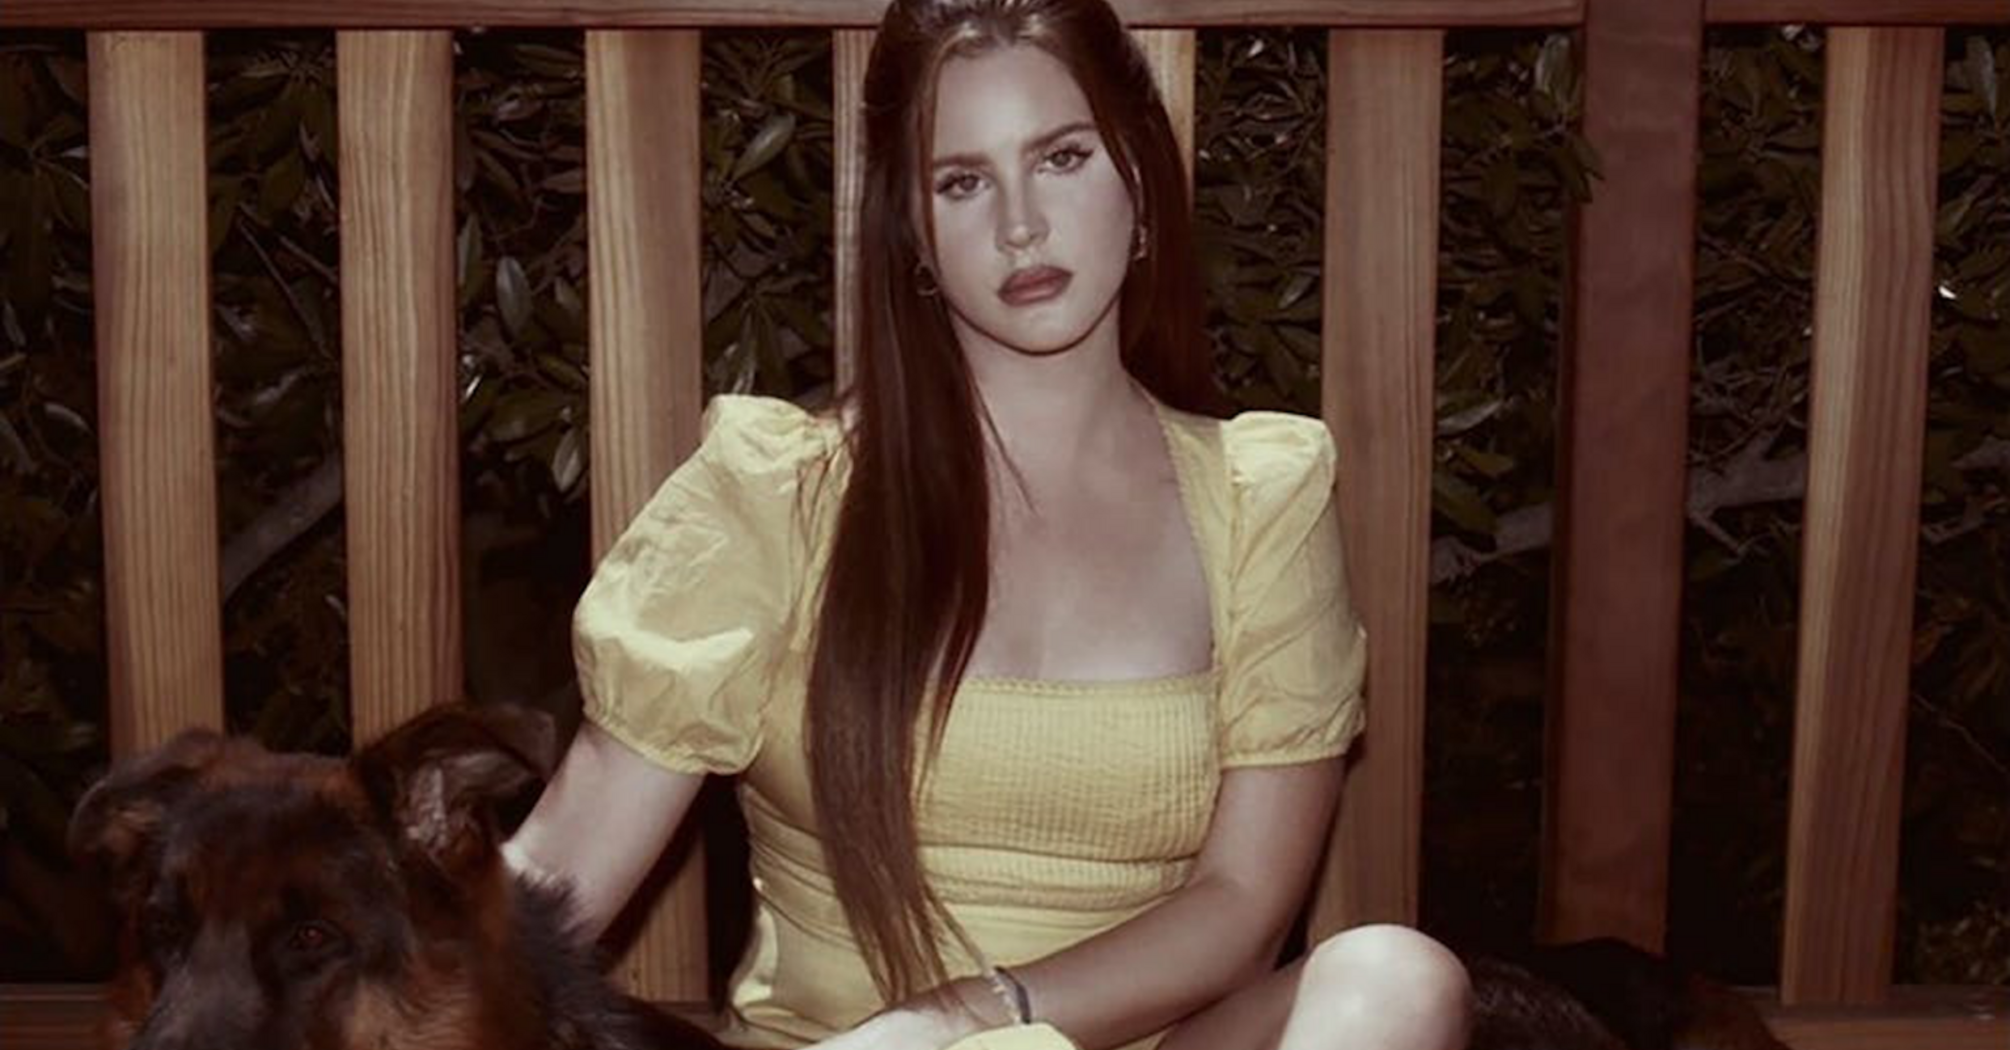 5 facts about Lana Del Rey